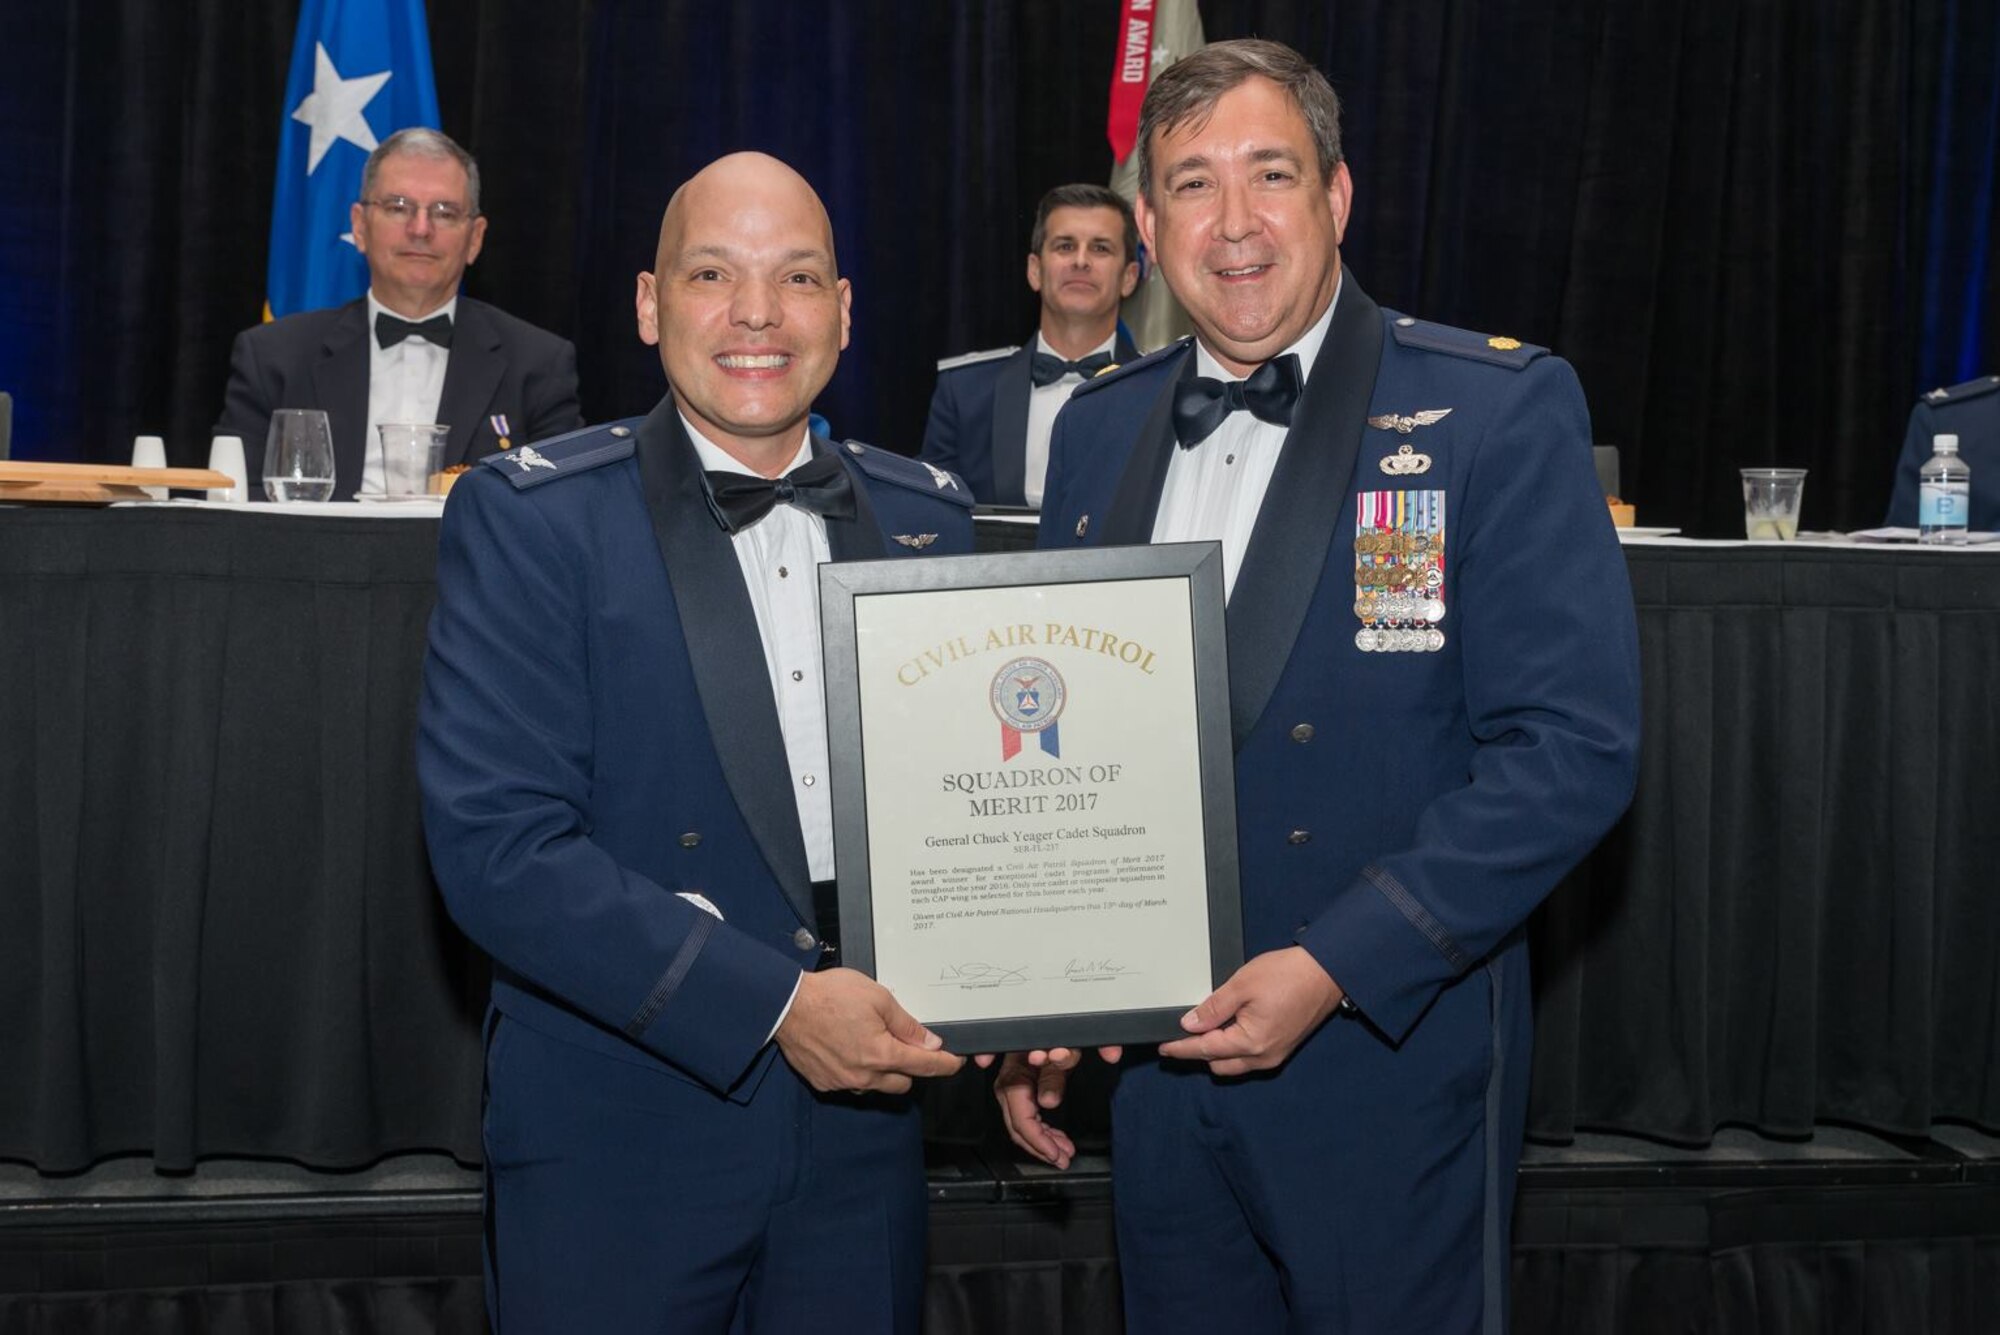 Civil Air Patrol Major Keith Barry, right, the squadron commander with the Civil Air Patrol General Chuck Yeager Cadet Squadron, receives the Florida CAP Wing 2017 Squadron of Merit award during the Florida Wing Conference in Orlando, Fla., April 29, 2017. Their squadron was hand selected out of nearly 80 squadrons. (courtesy photo)